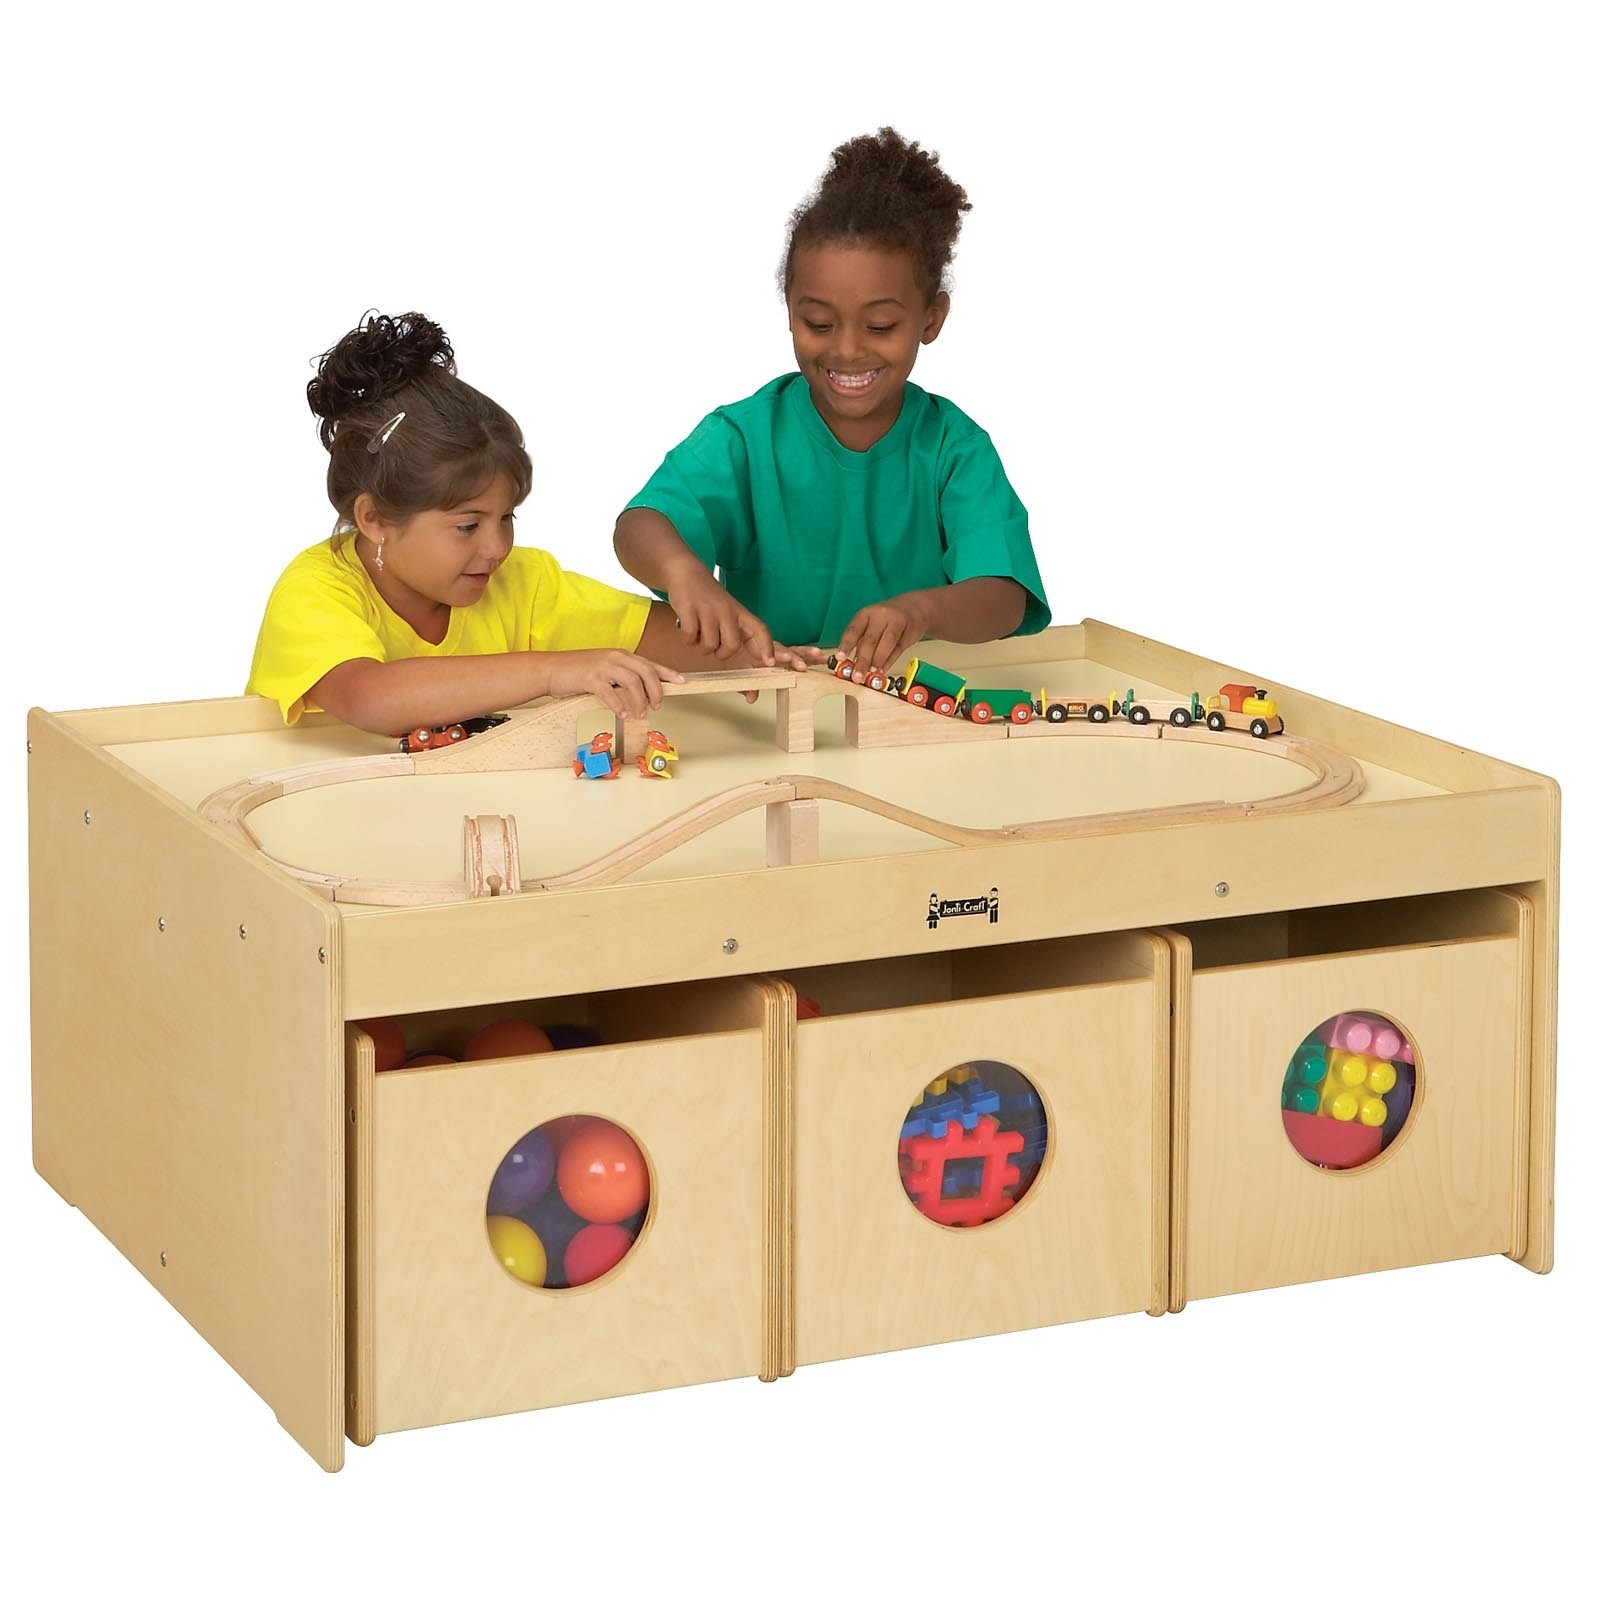 childs activity table